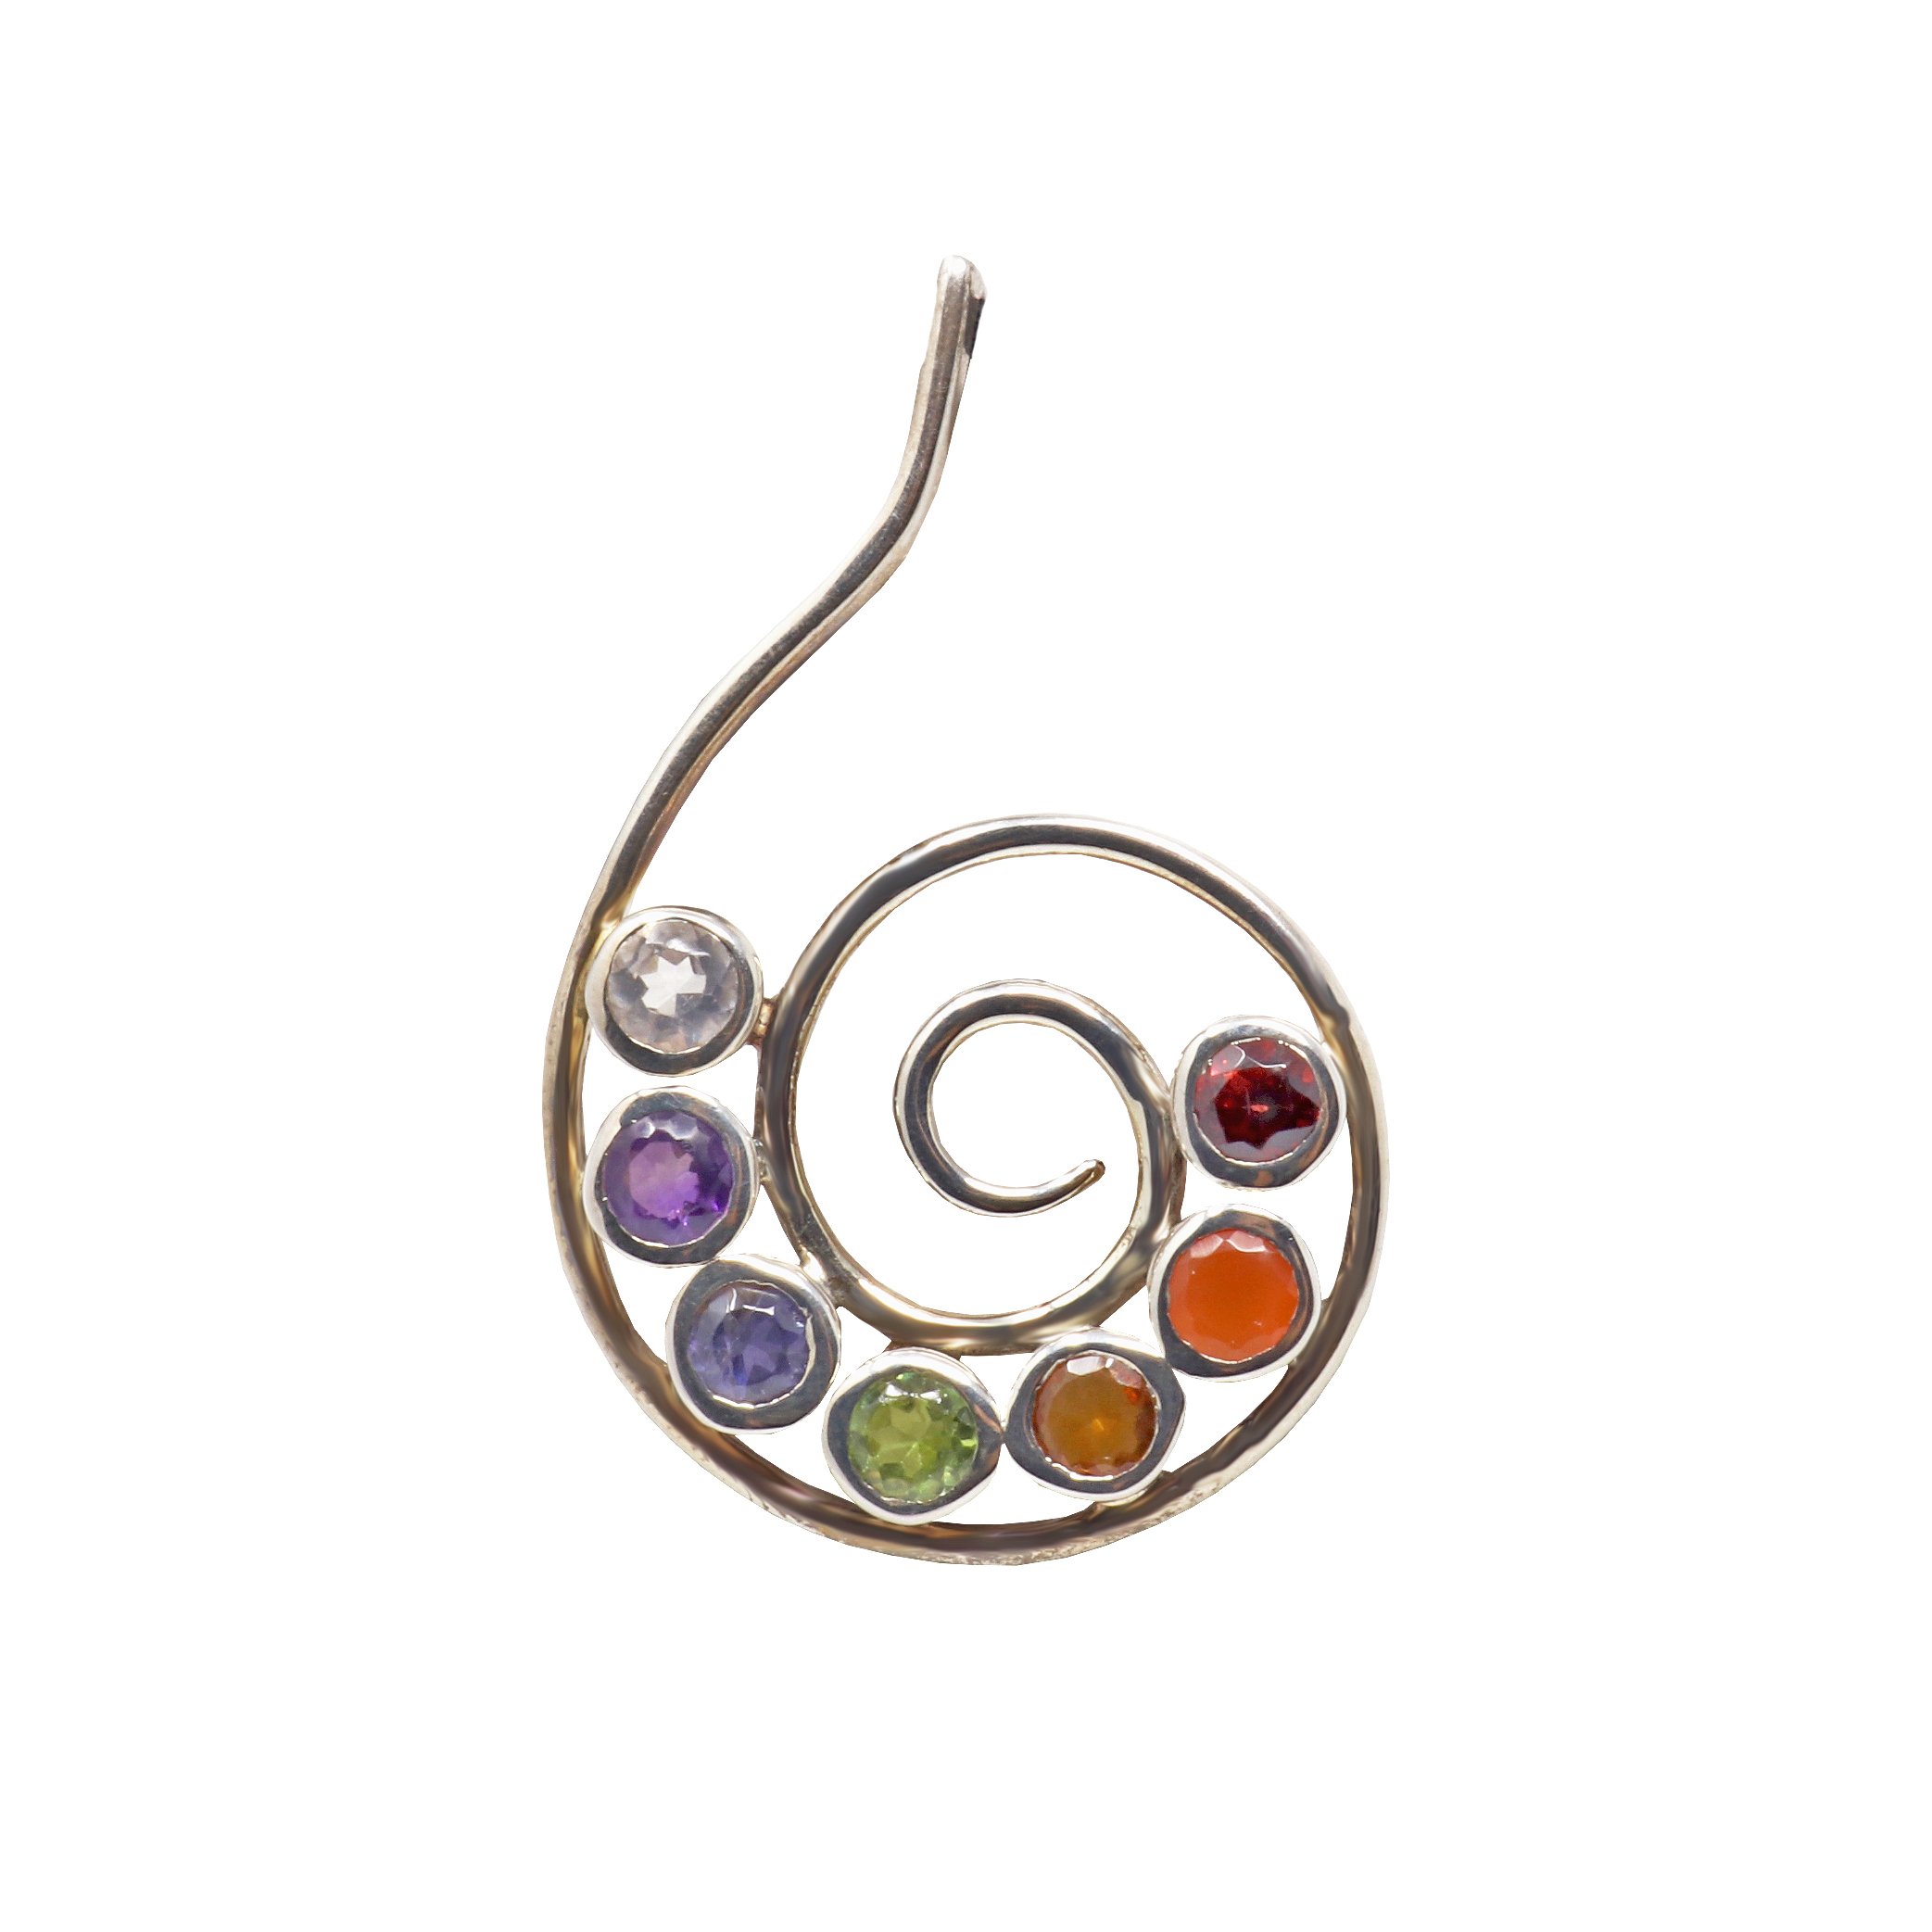 7 Chakra Pendant - Faceted Rounds On Simple Silver Wire Spiral